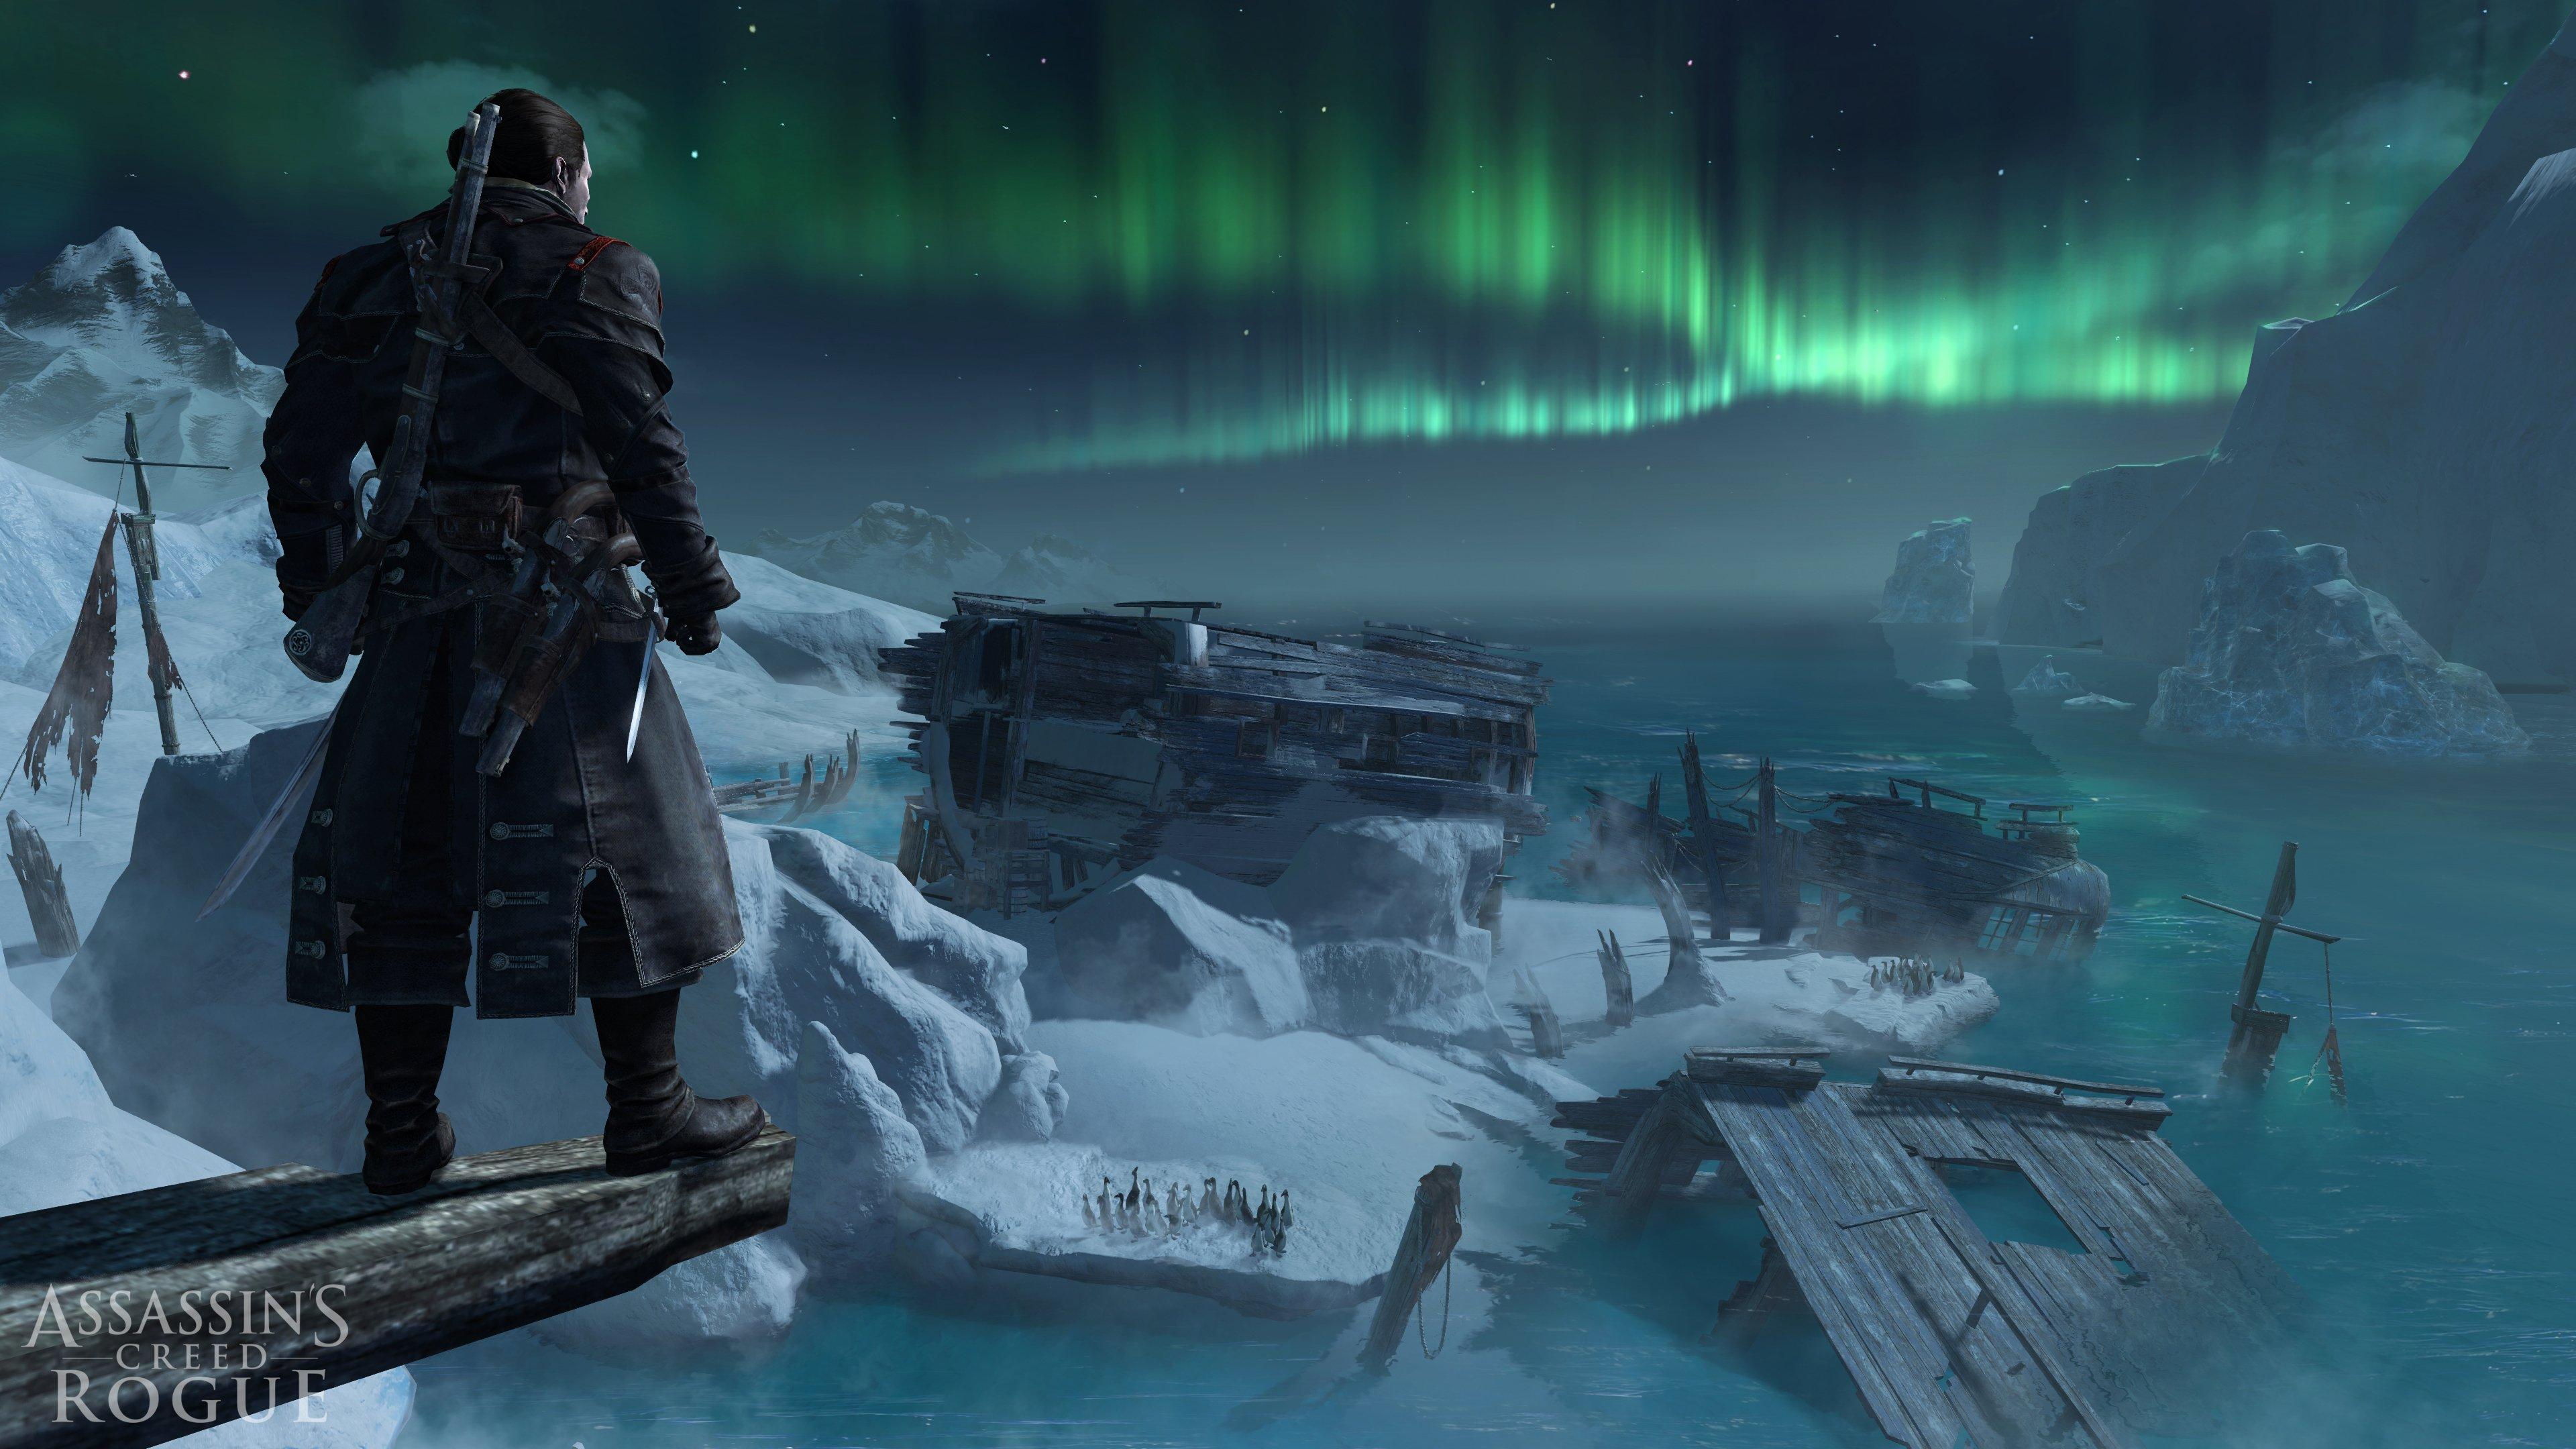 list item 5 of 6 Assassin's Creed Rogue